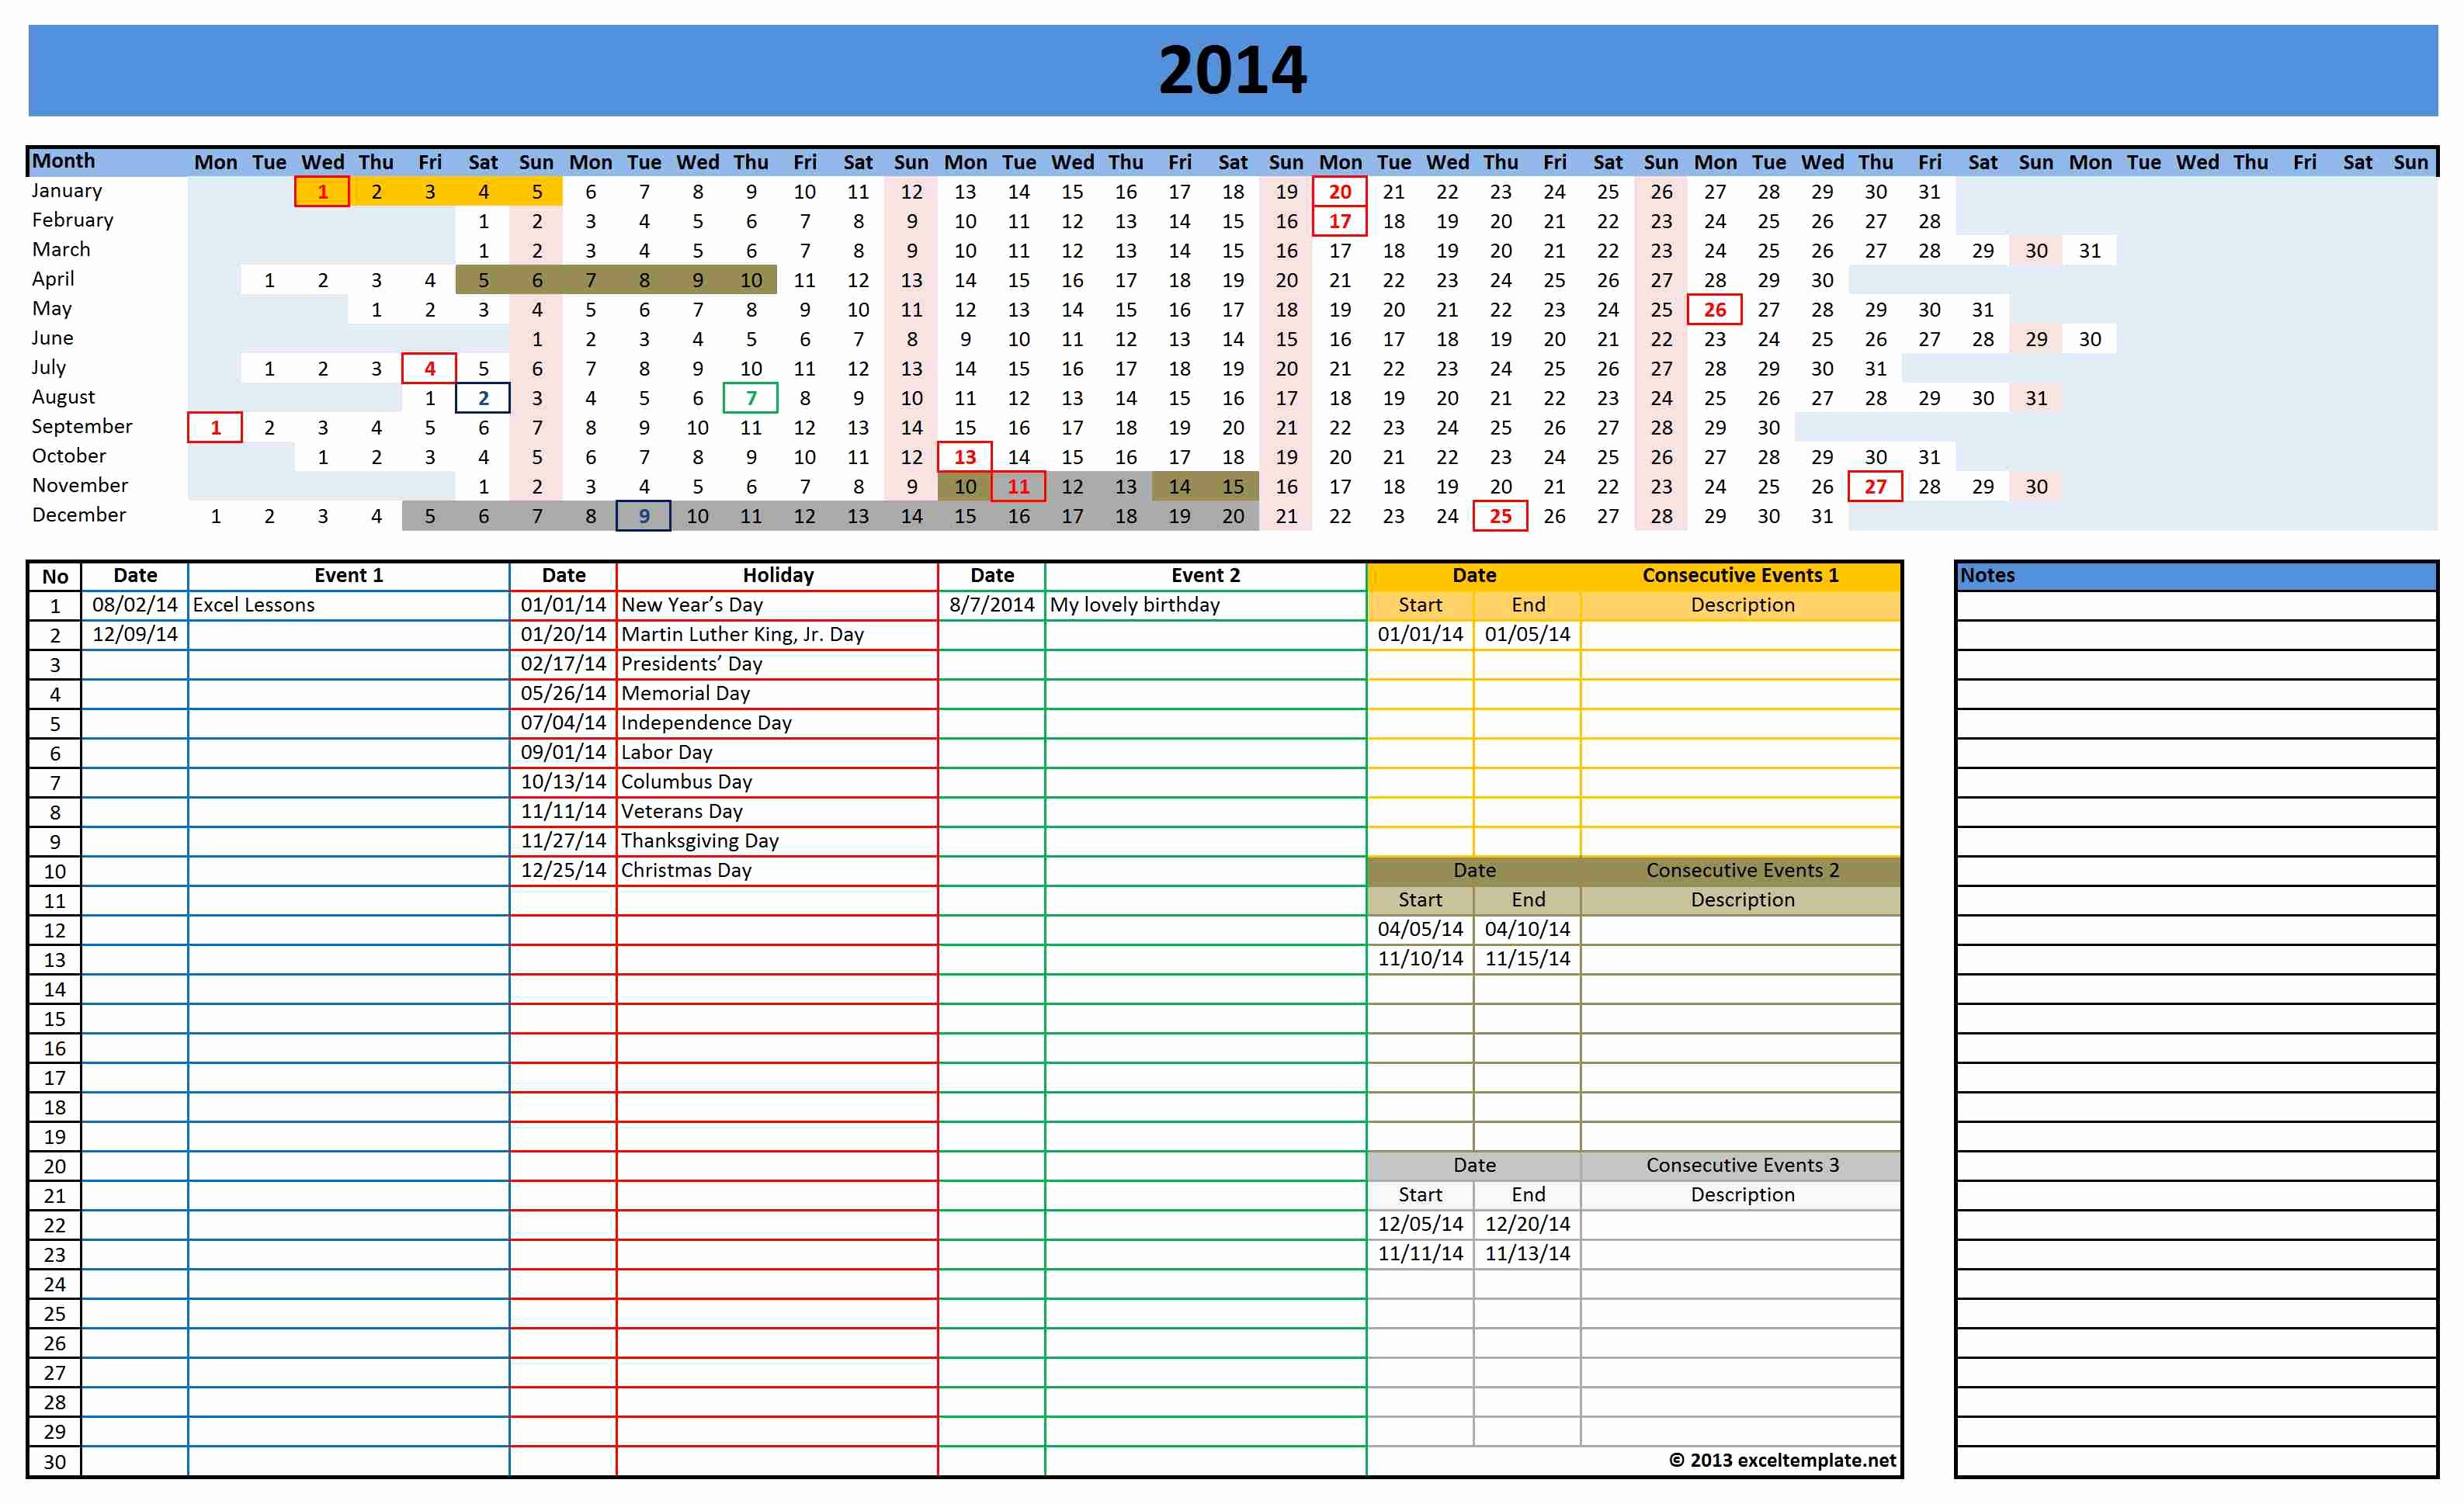 Excel Spreadsheet Template for Scheduling Awesome Excel Calendar Templates